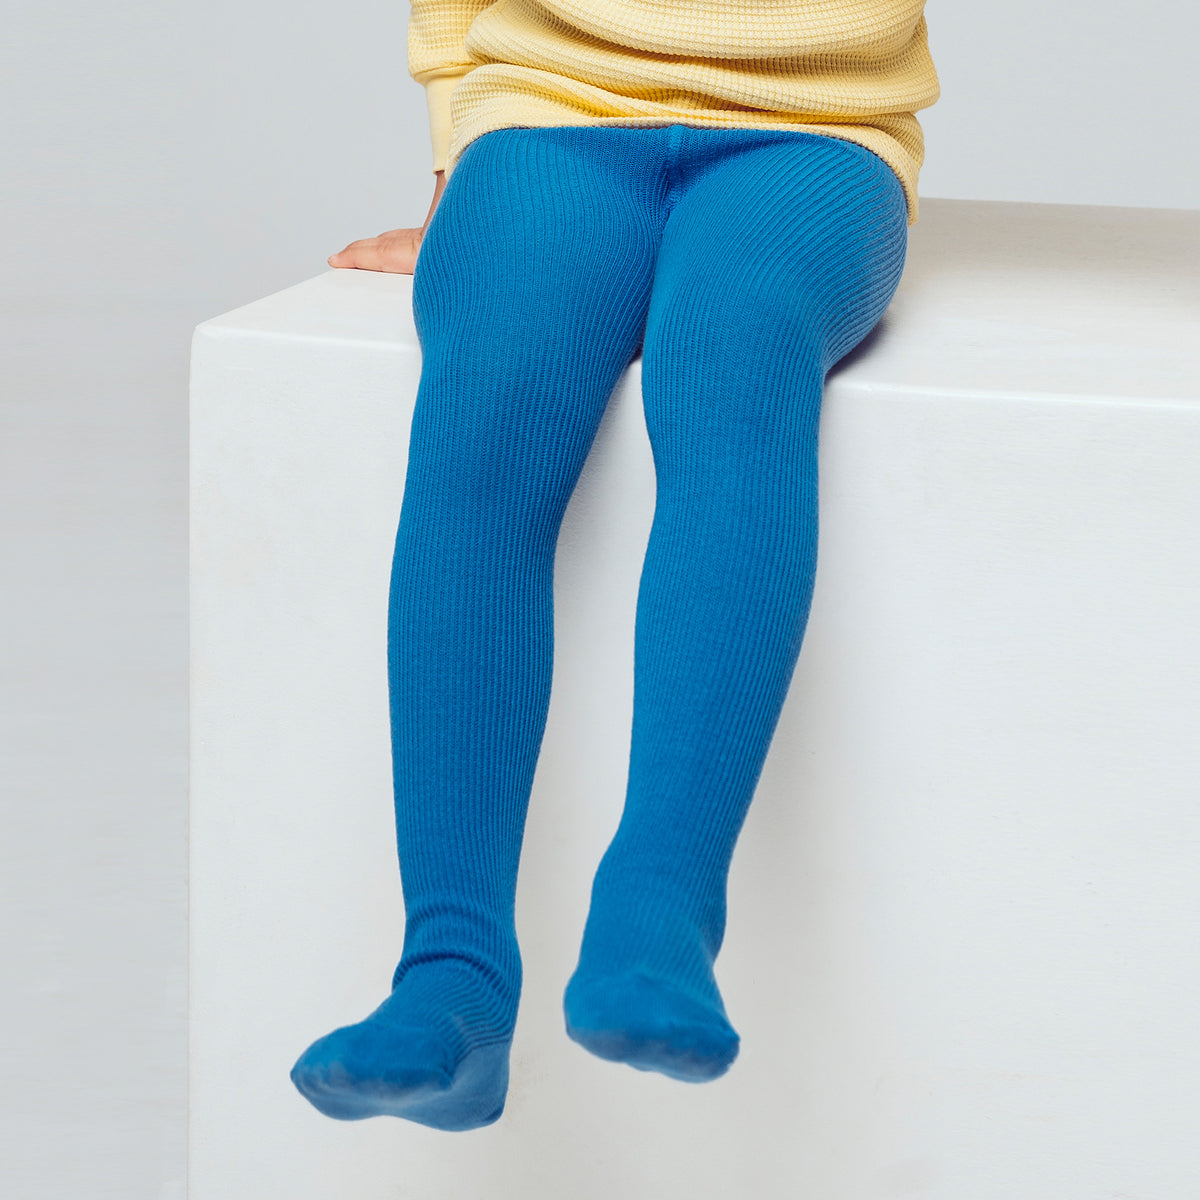 PEQNE Footed Children Tights in French Blue